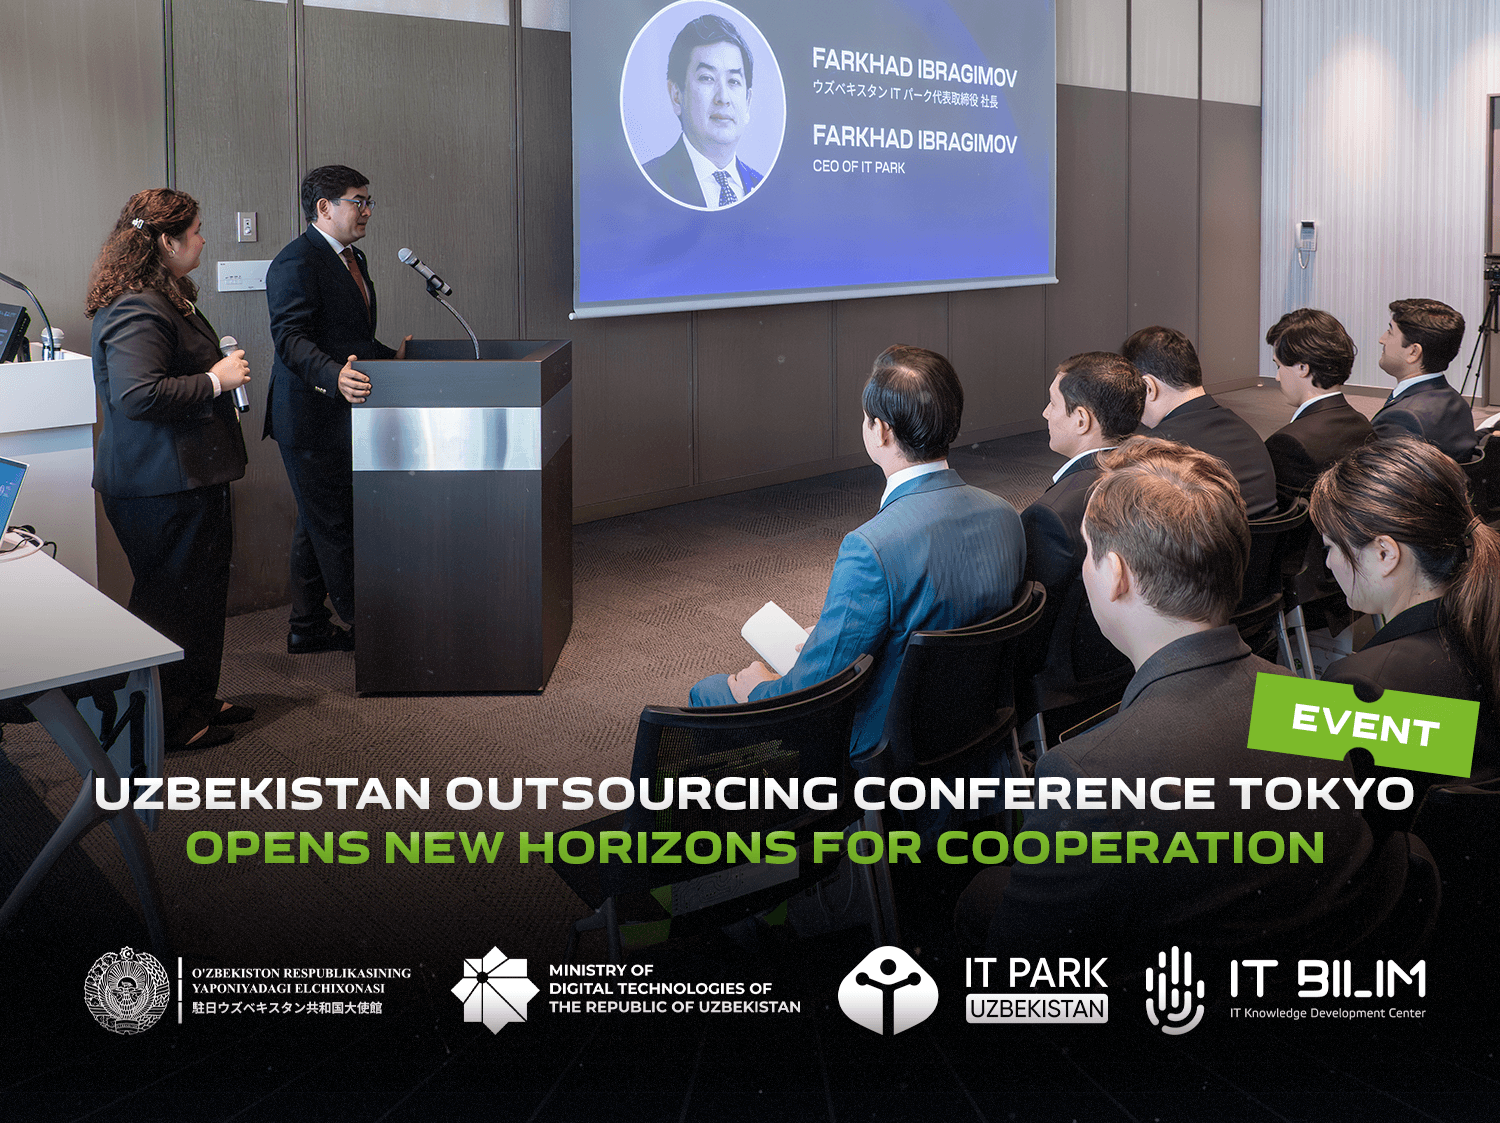 The Uzbekistan Outsourcing Conference Tokyo opens new avenues for cooperation